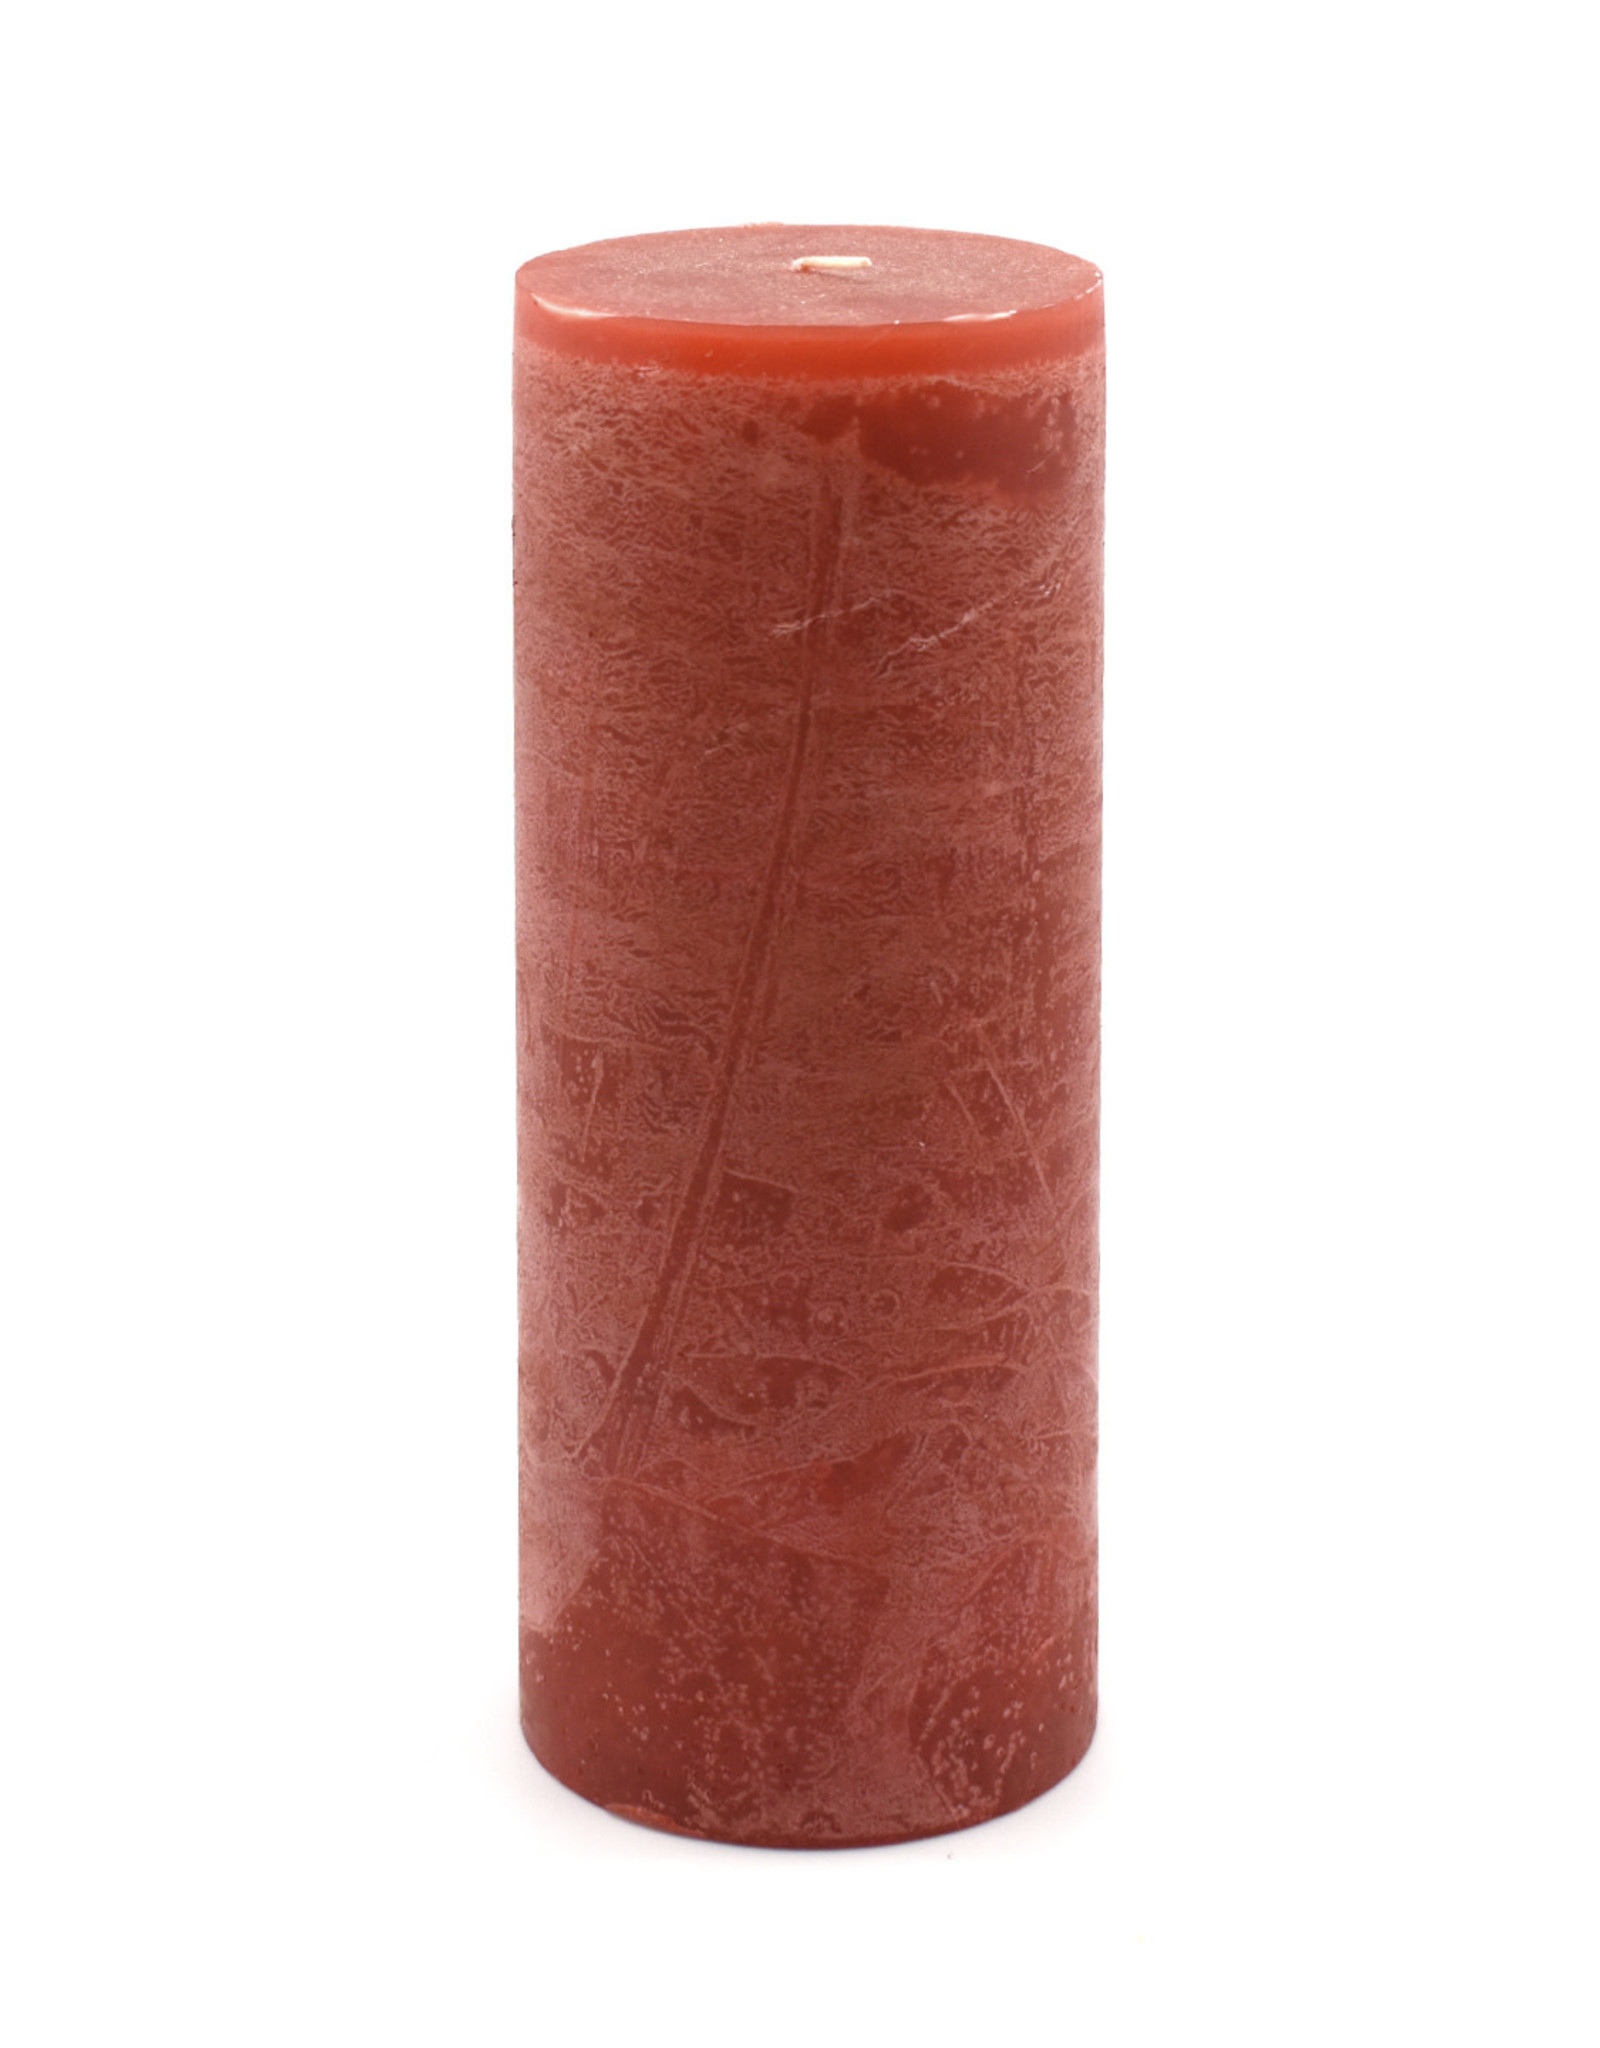 Timber Candle (Tall) - Cranberry - Seconds Sale